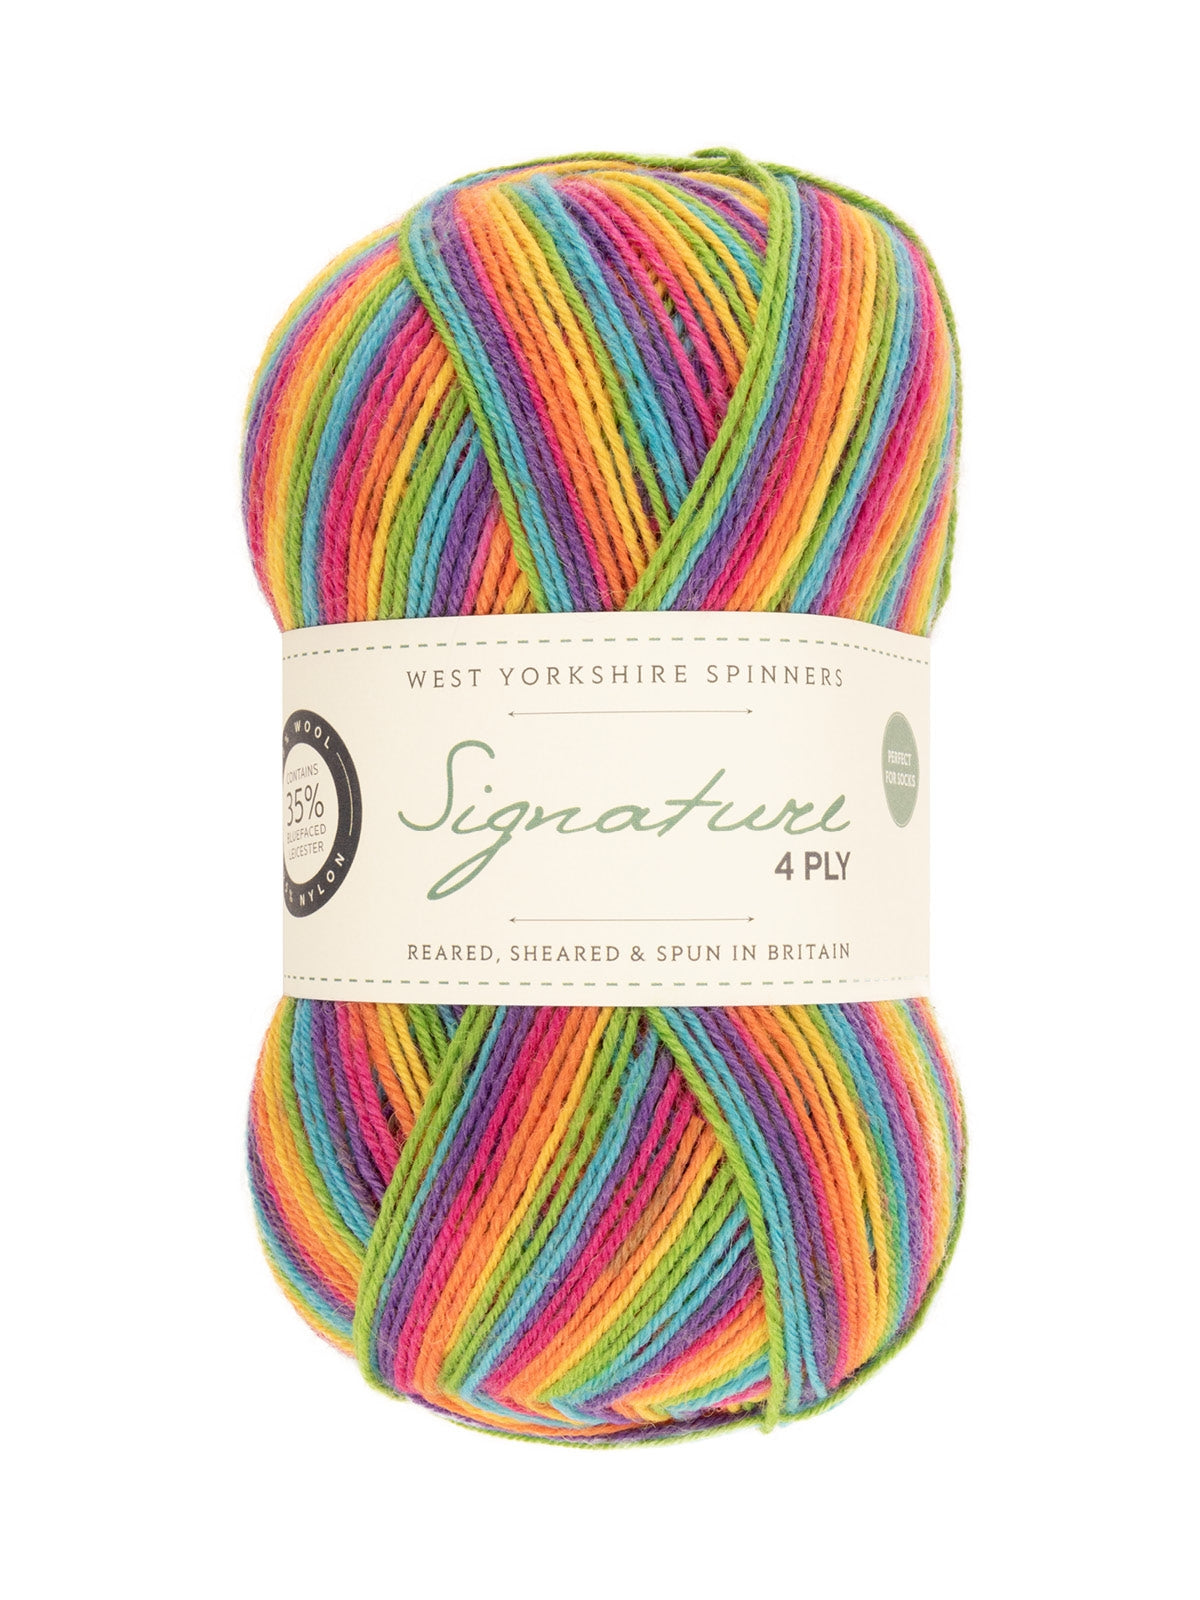 Signature 4 Ply West Yorkshire Spinners